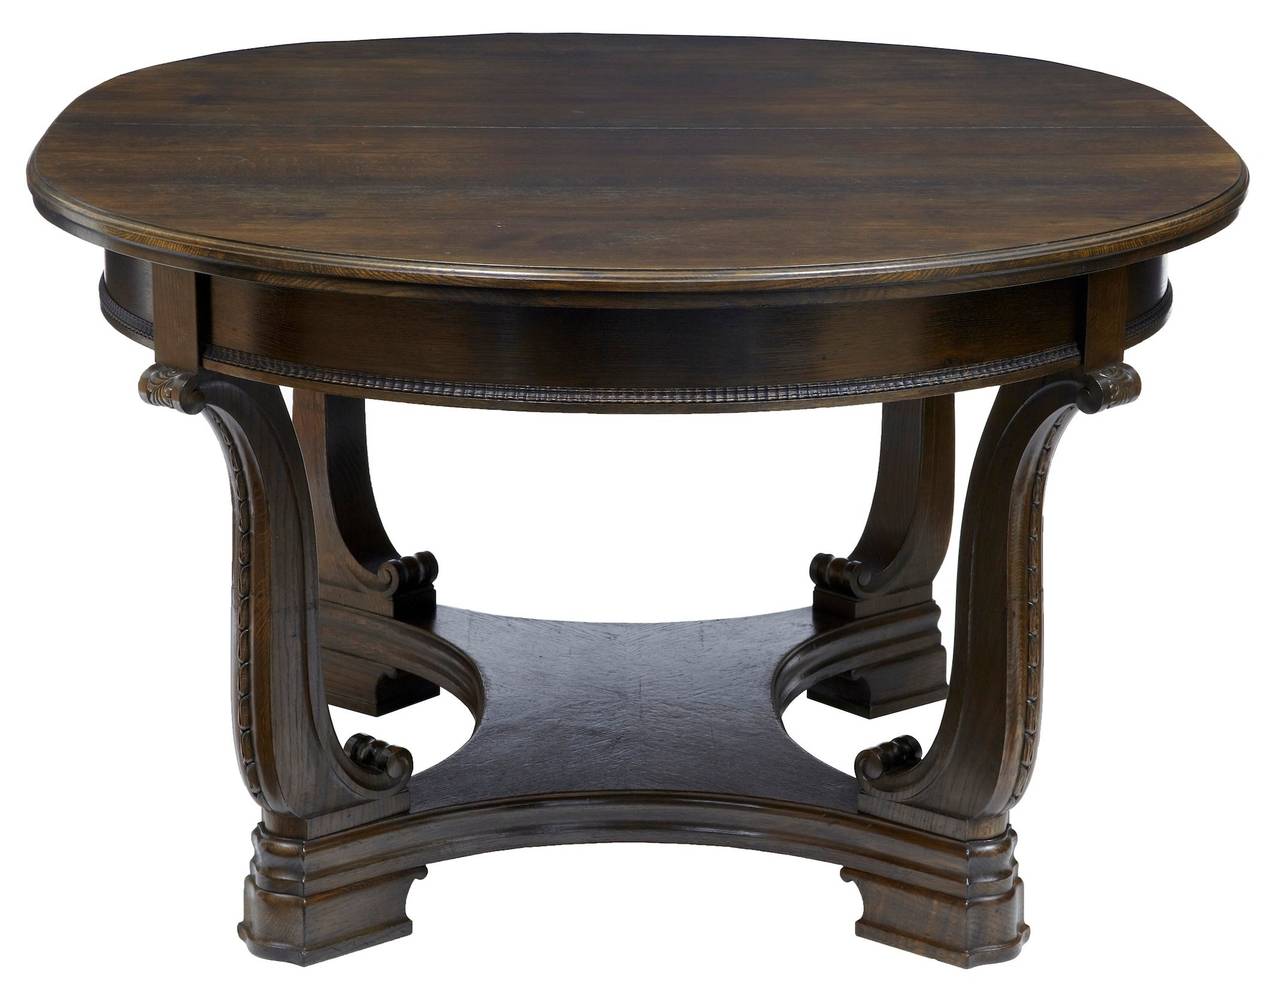 Swedish oak extending table with leaves circa 1880. 

Carved lyre shaped legs 

Typical with swedish leaves of the period they are primitive compared to the table, but they give an extra 100 1/2 inches, making this table capable of seating